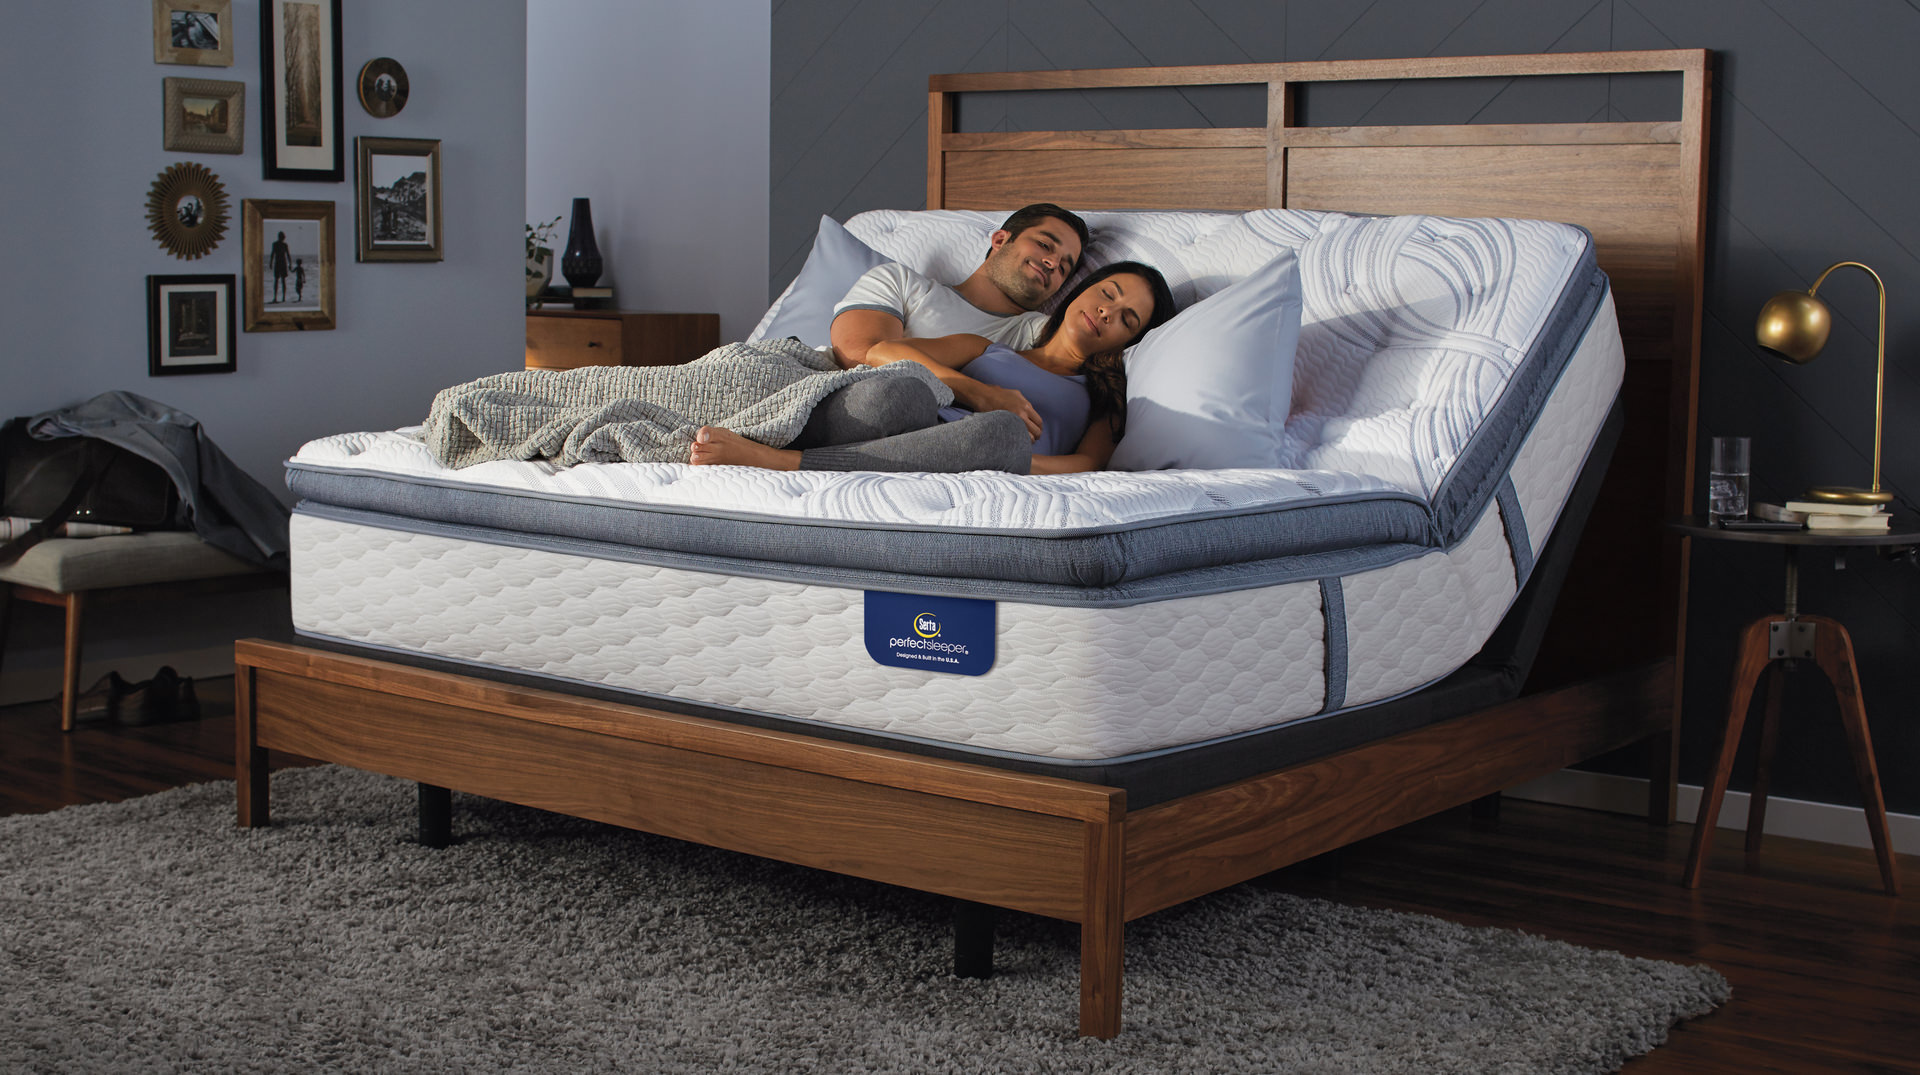 What are the health benefits that you can get by using the adjustable bed? Dallas Architecture